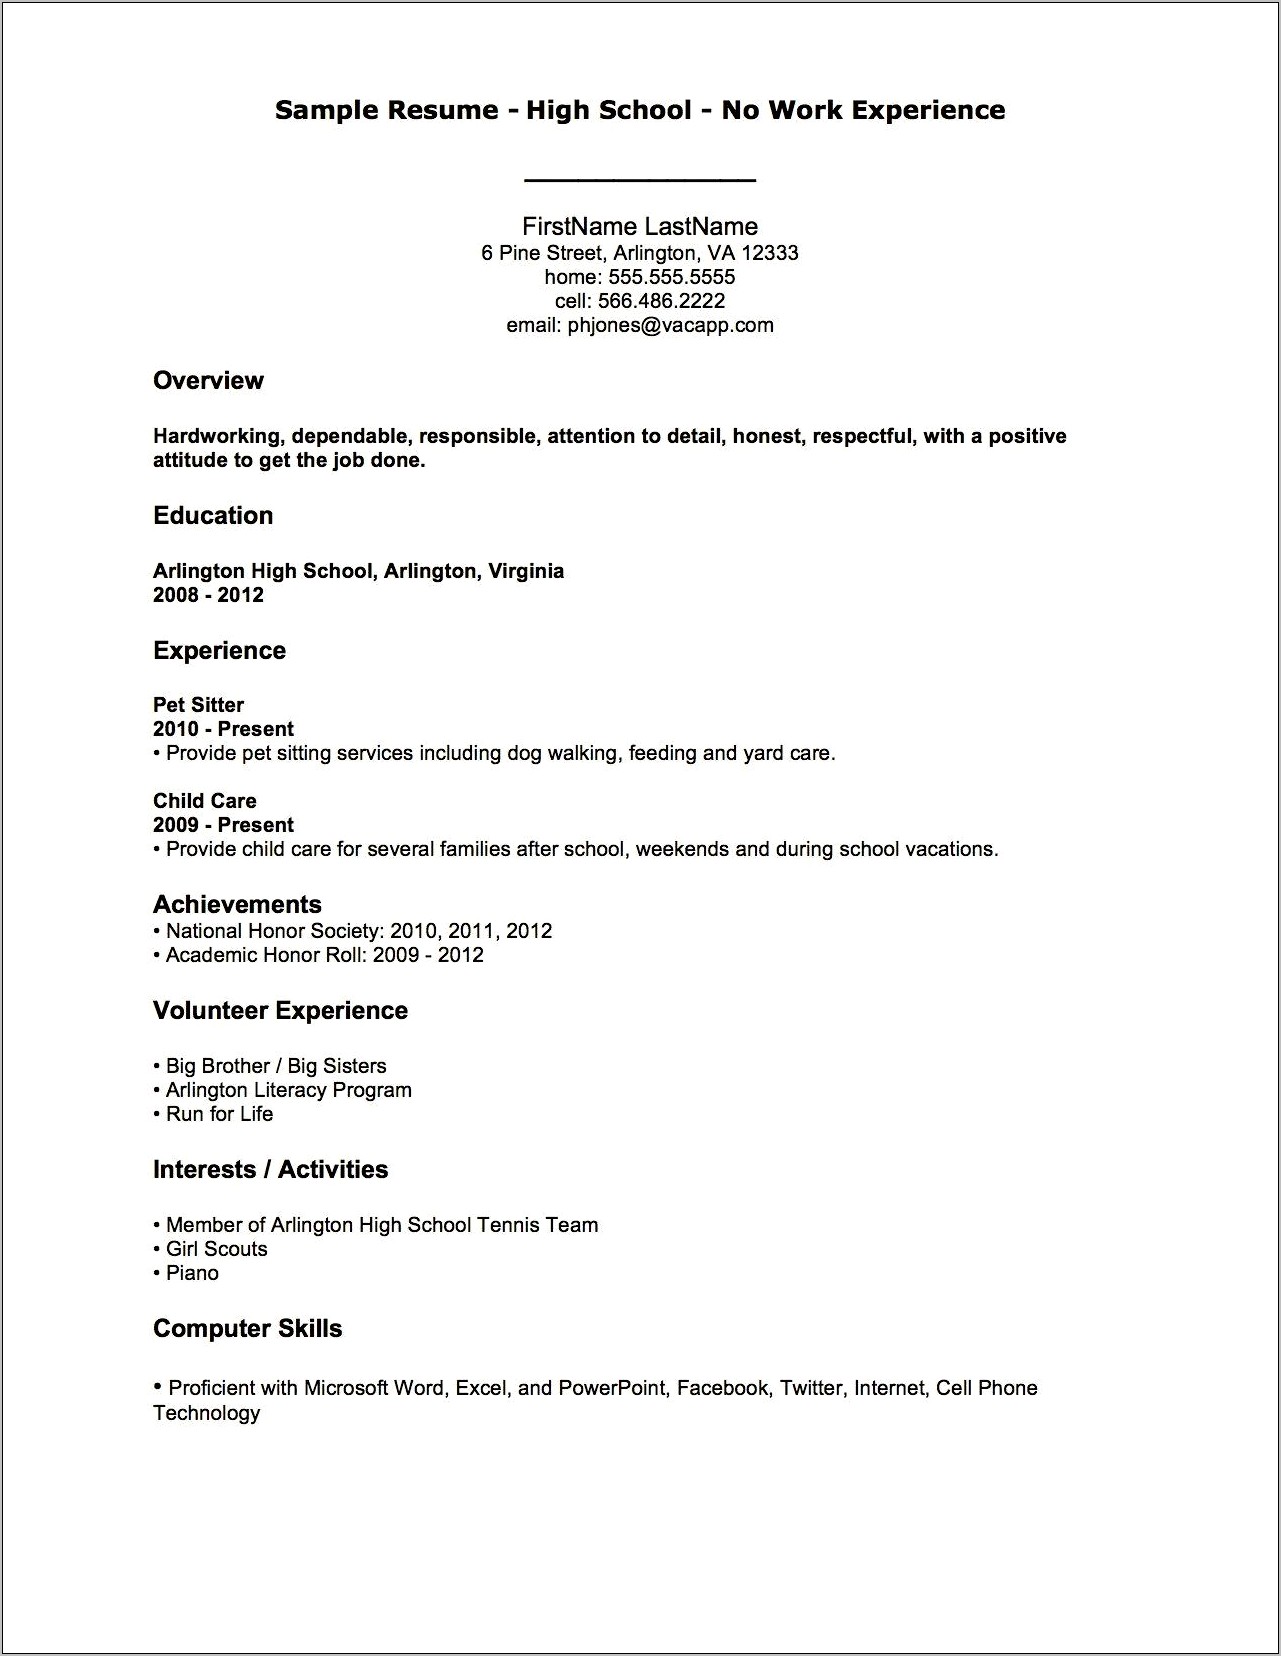 Sample Resume Template For Those Without Work Experience